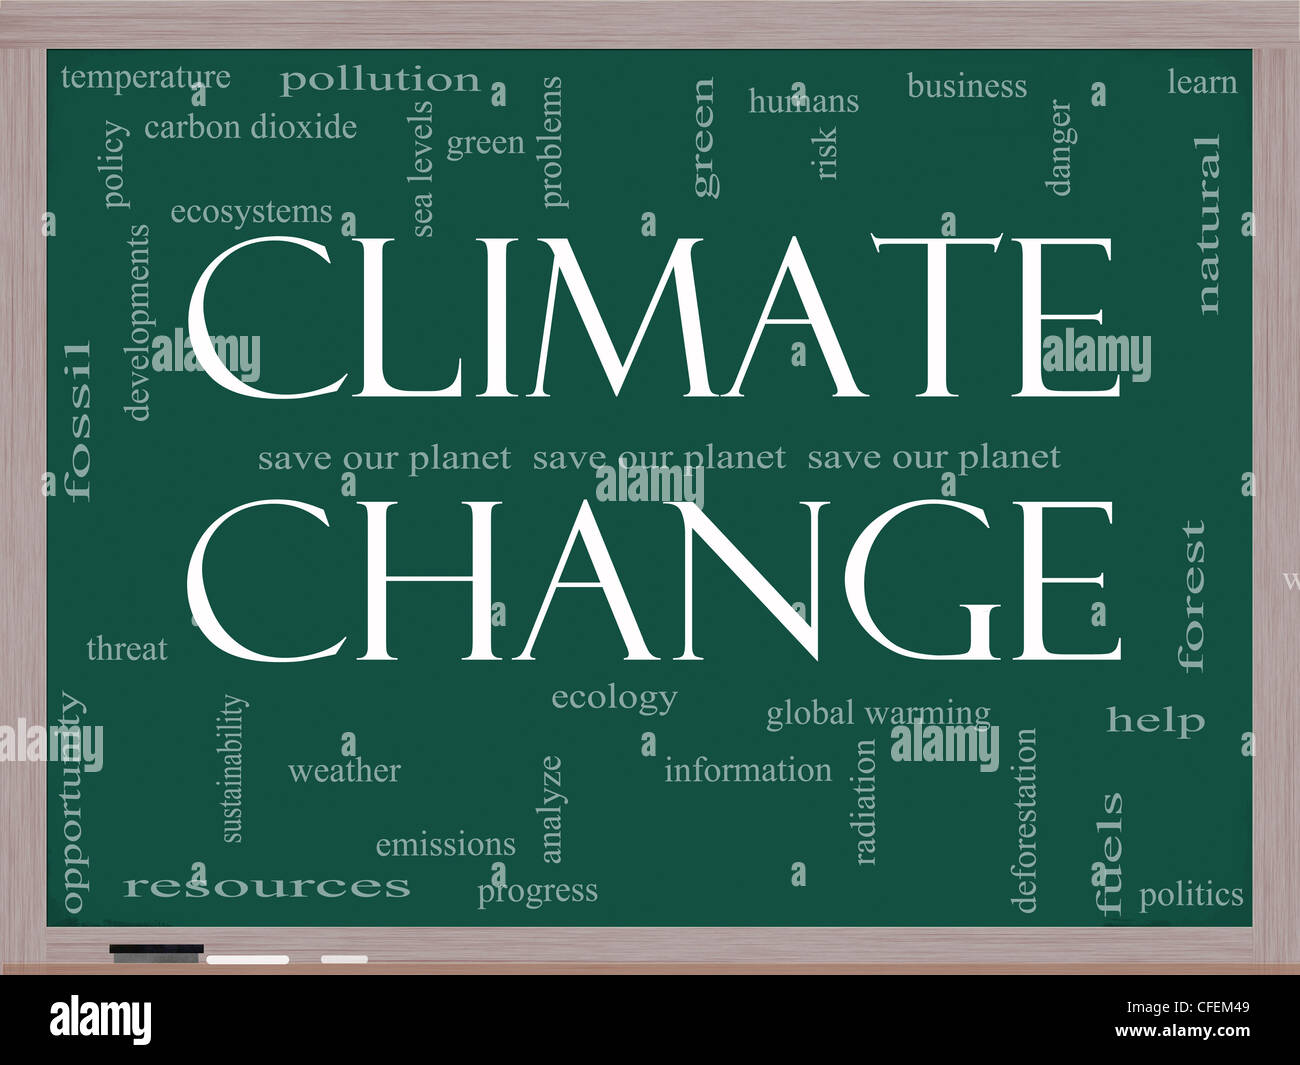 A Climate Change word cloud concept on a blackboard with terms such as save, planet, global, warming, green and more. Stock Photo